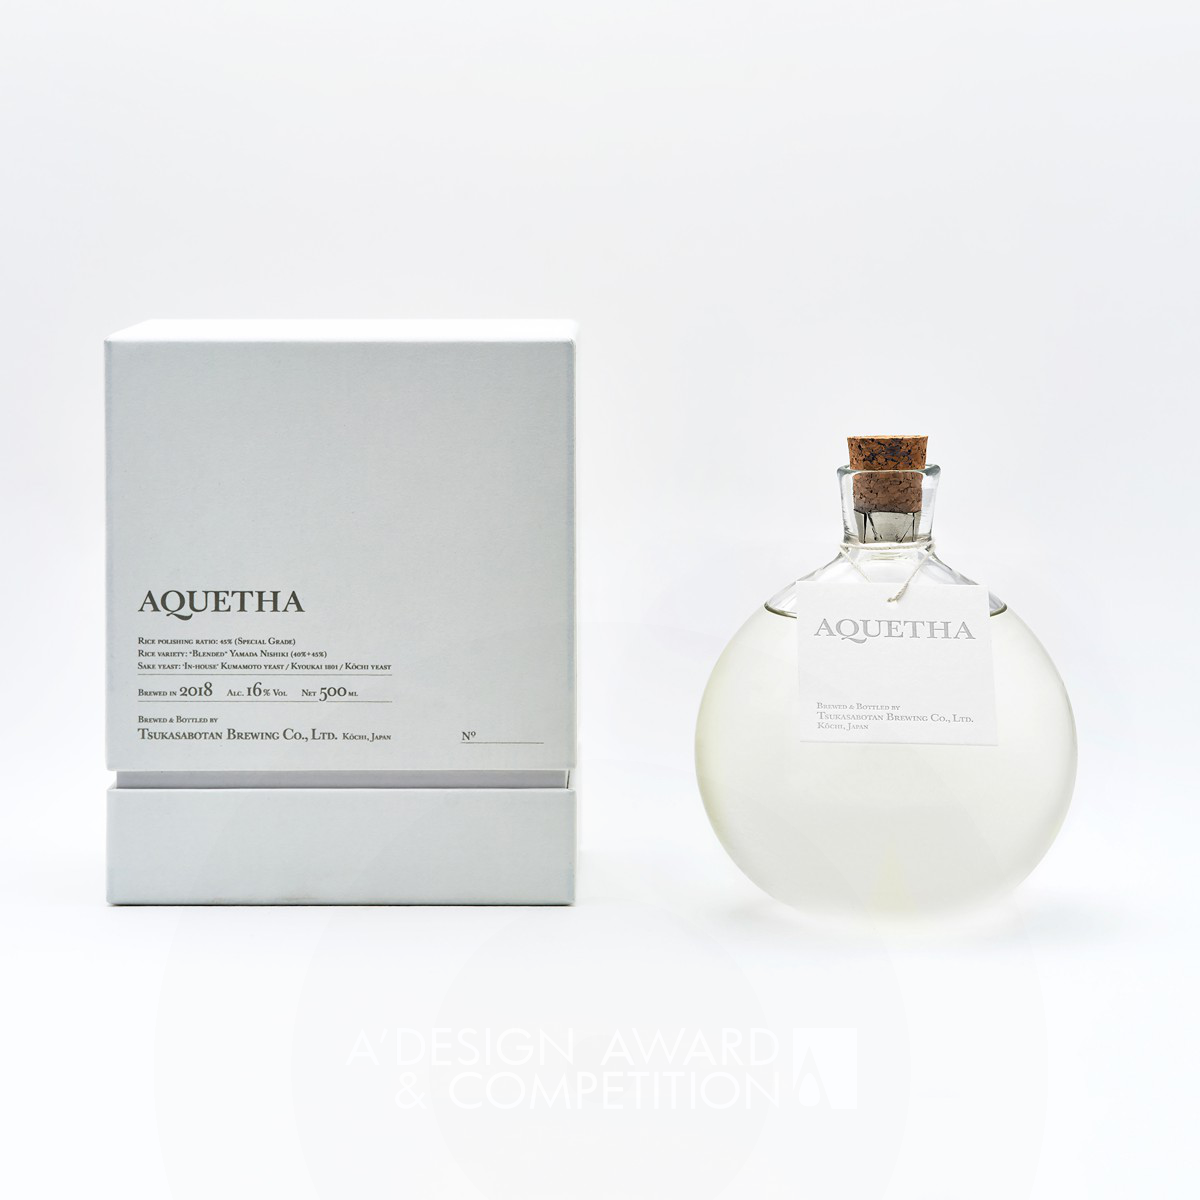 Aquetha Branding and Packaging by Tacto Inc. Silver Packaging Design Award Winner 2024 